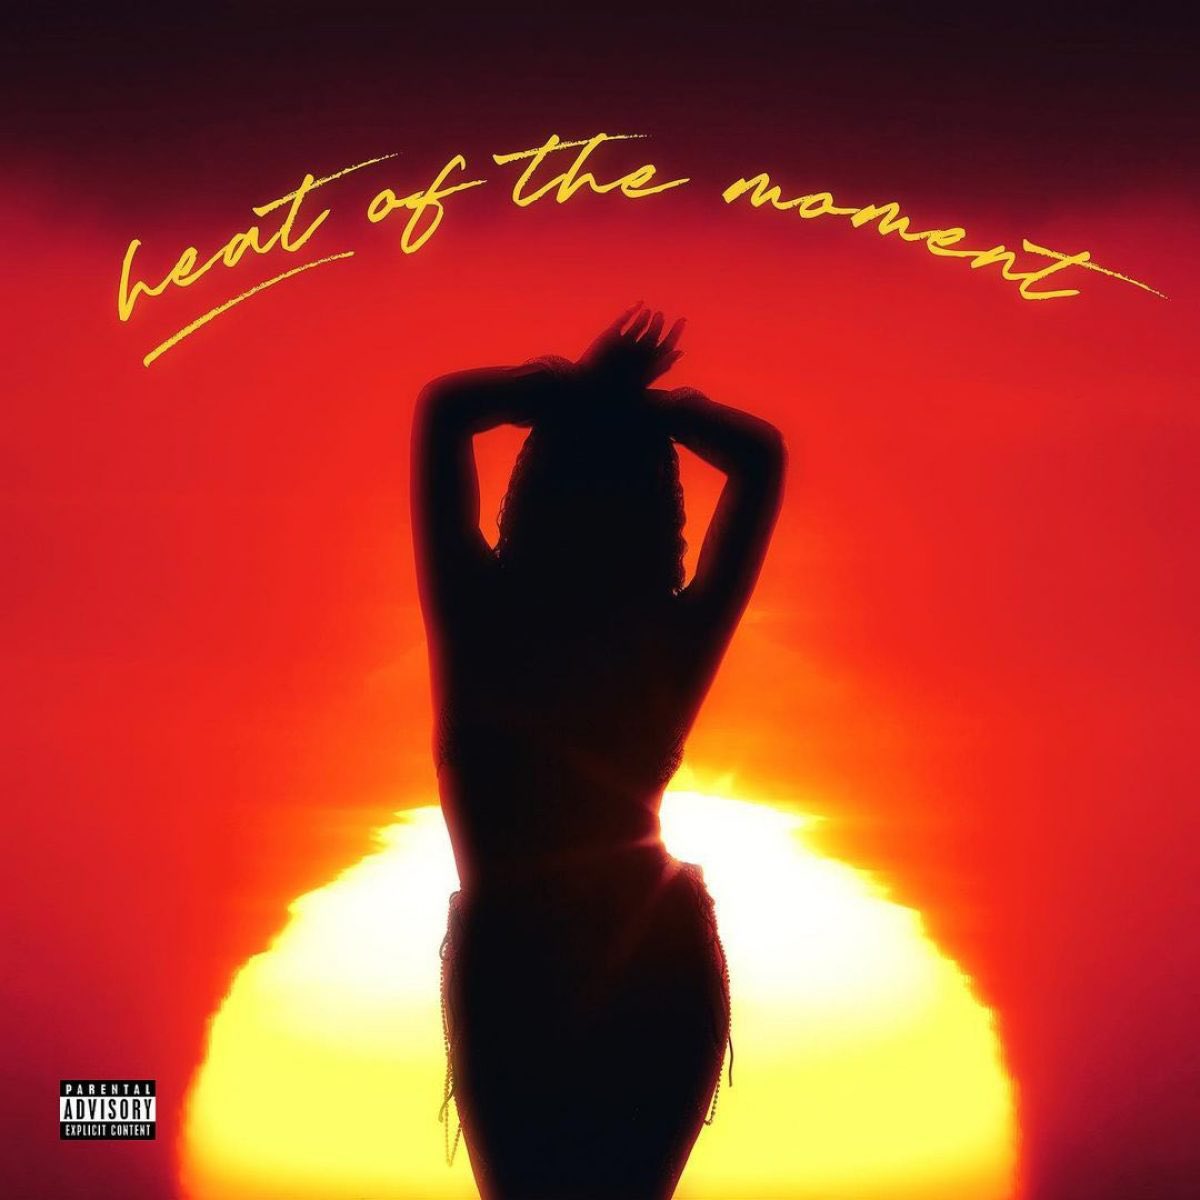 Even before her #HopelessRomantic debut in 2020, @Official_Tink has consistently put out music over the years, but it appears her new album, #HeatOfTheMoment, may be the one that propels the Chicago native to new heights! Thoughts?! #DondaEsta #SoundCloud bit.ly/3iBqEyV